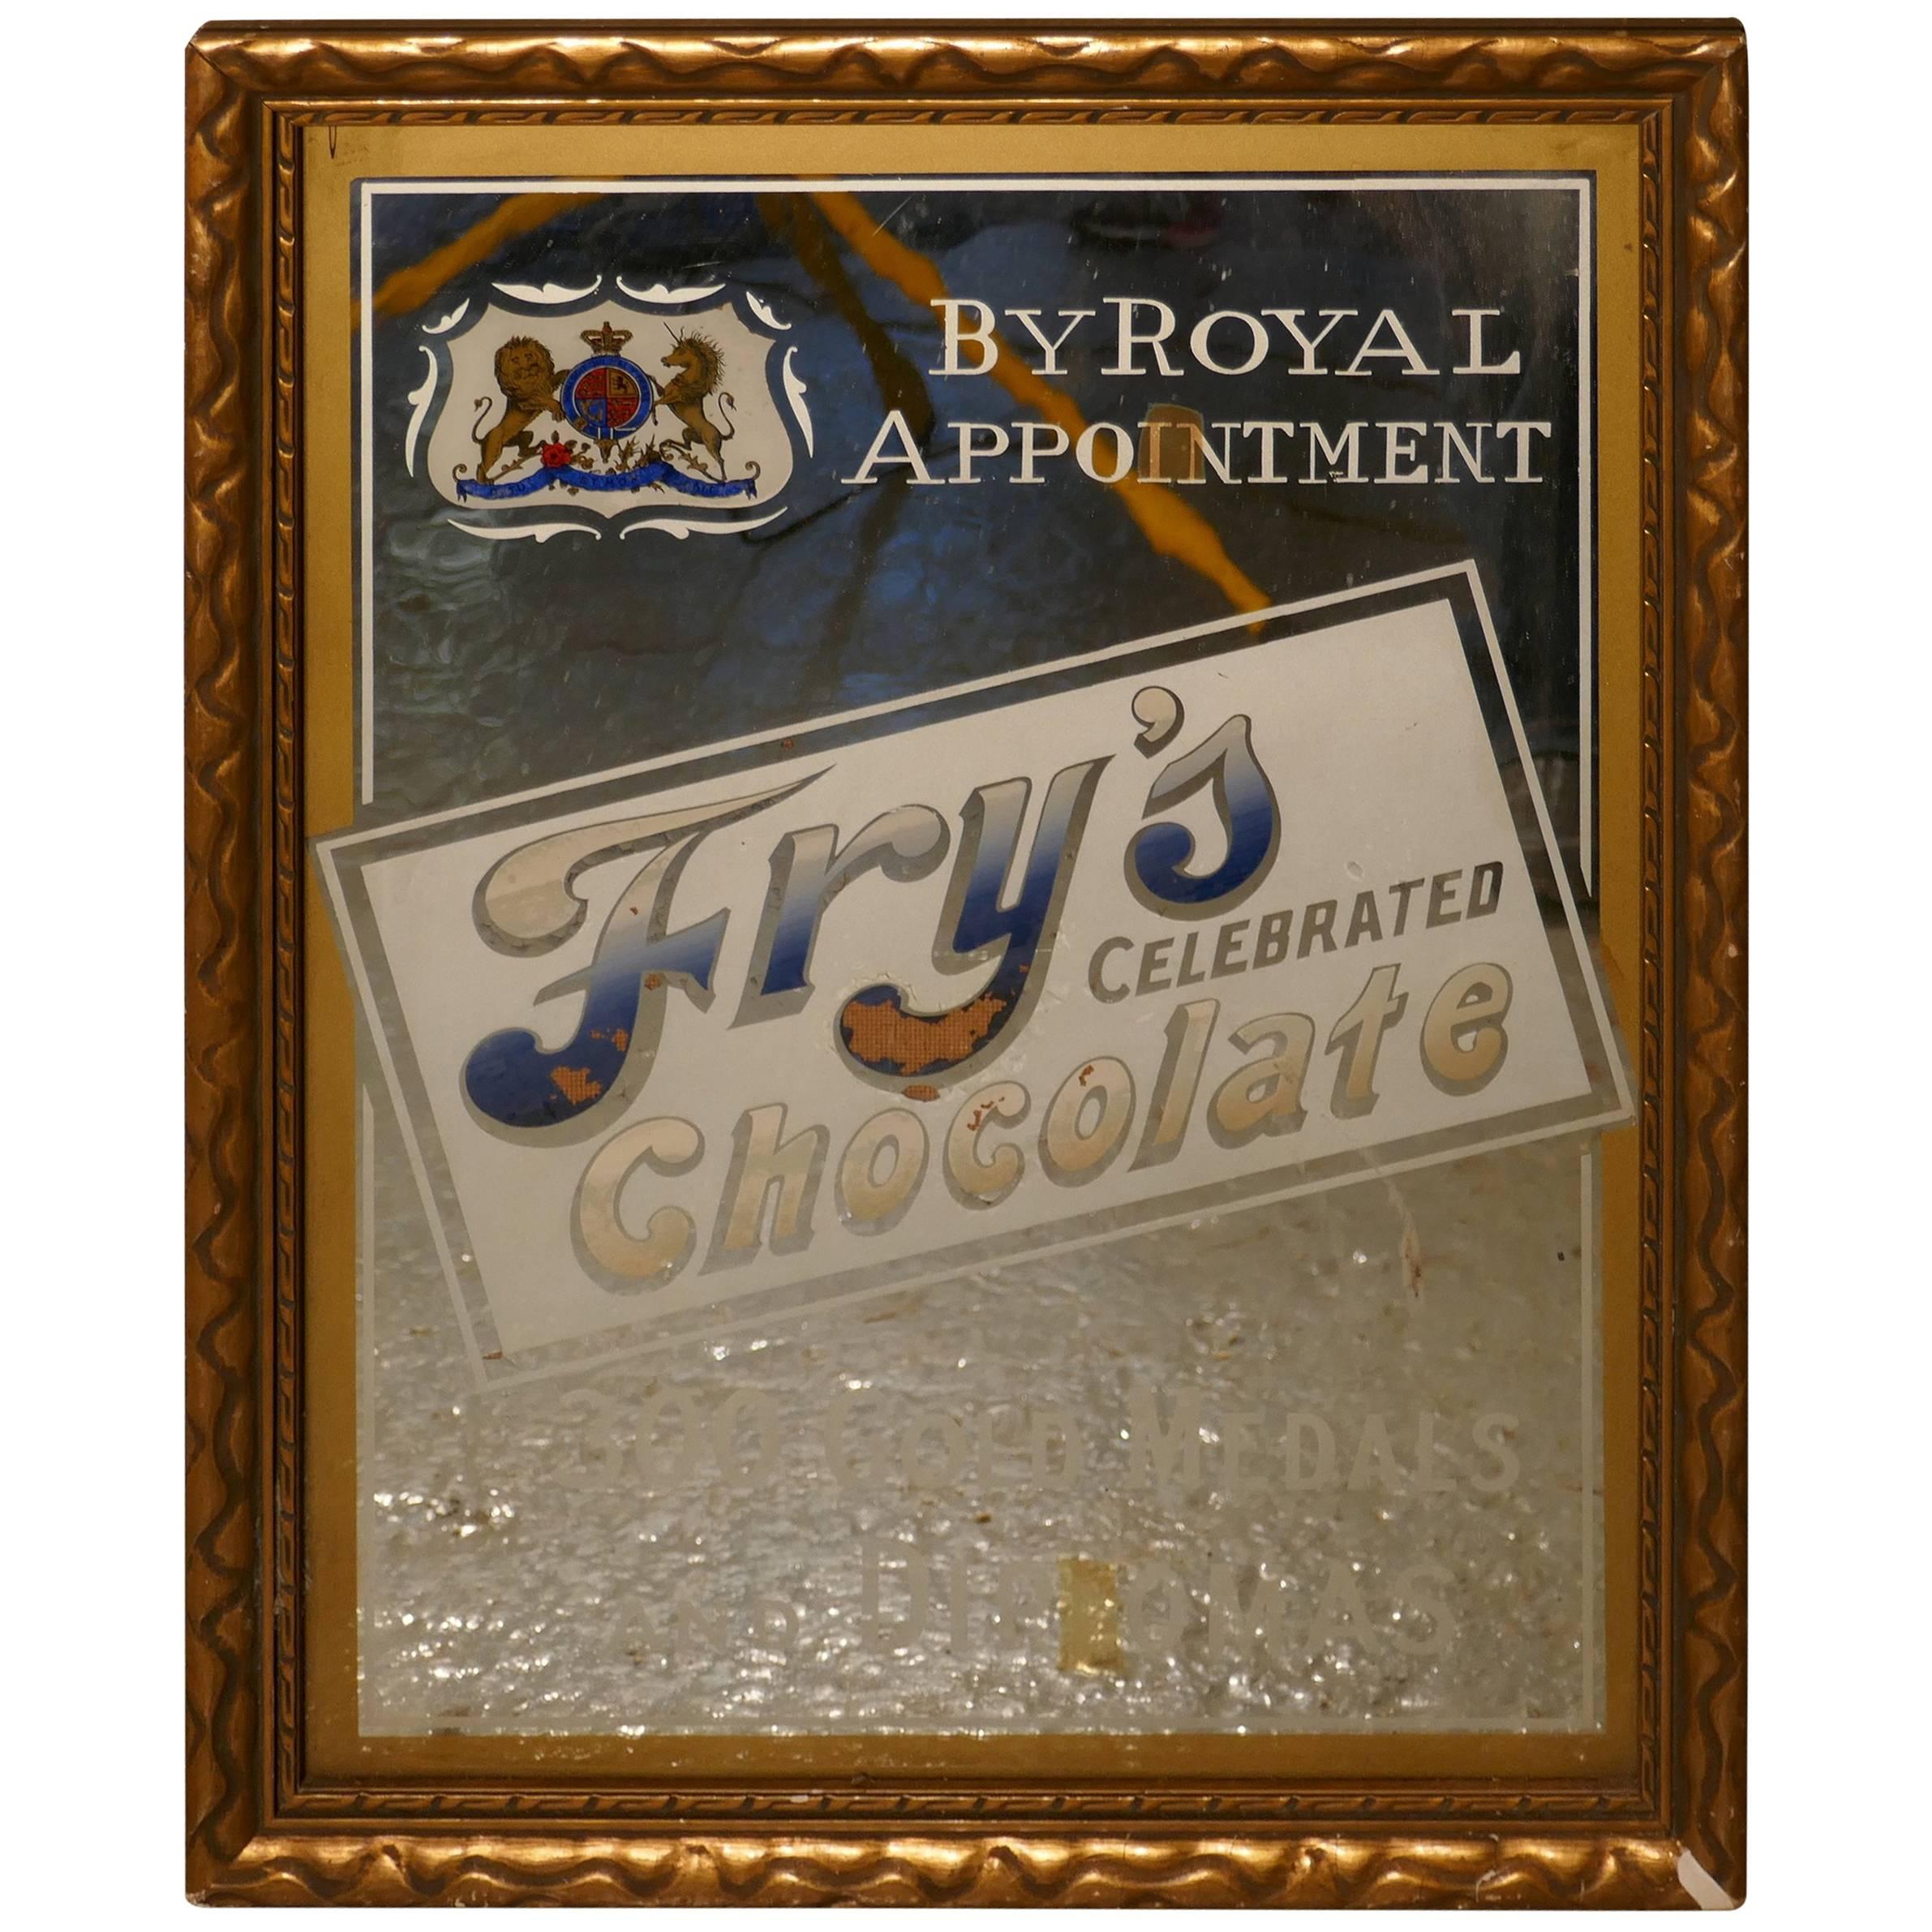 Fry’s Celebrated Chocolate Advertising Mirror by Royal Appointment For Sale